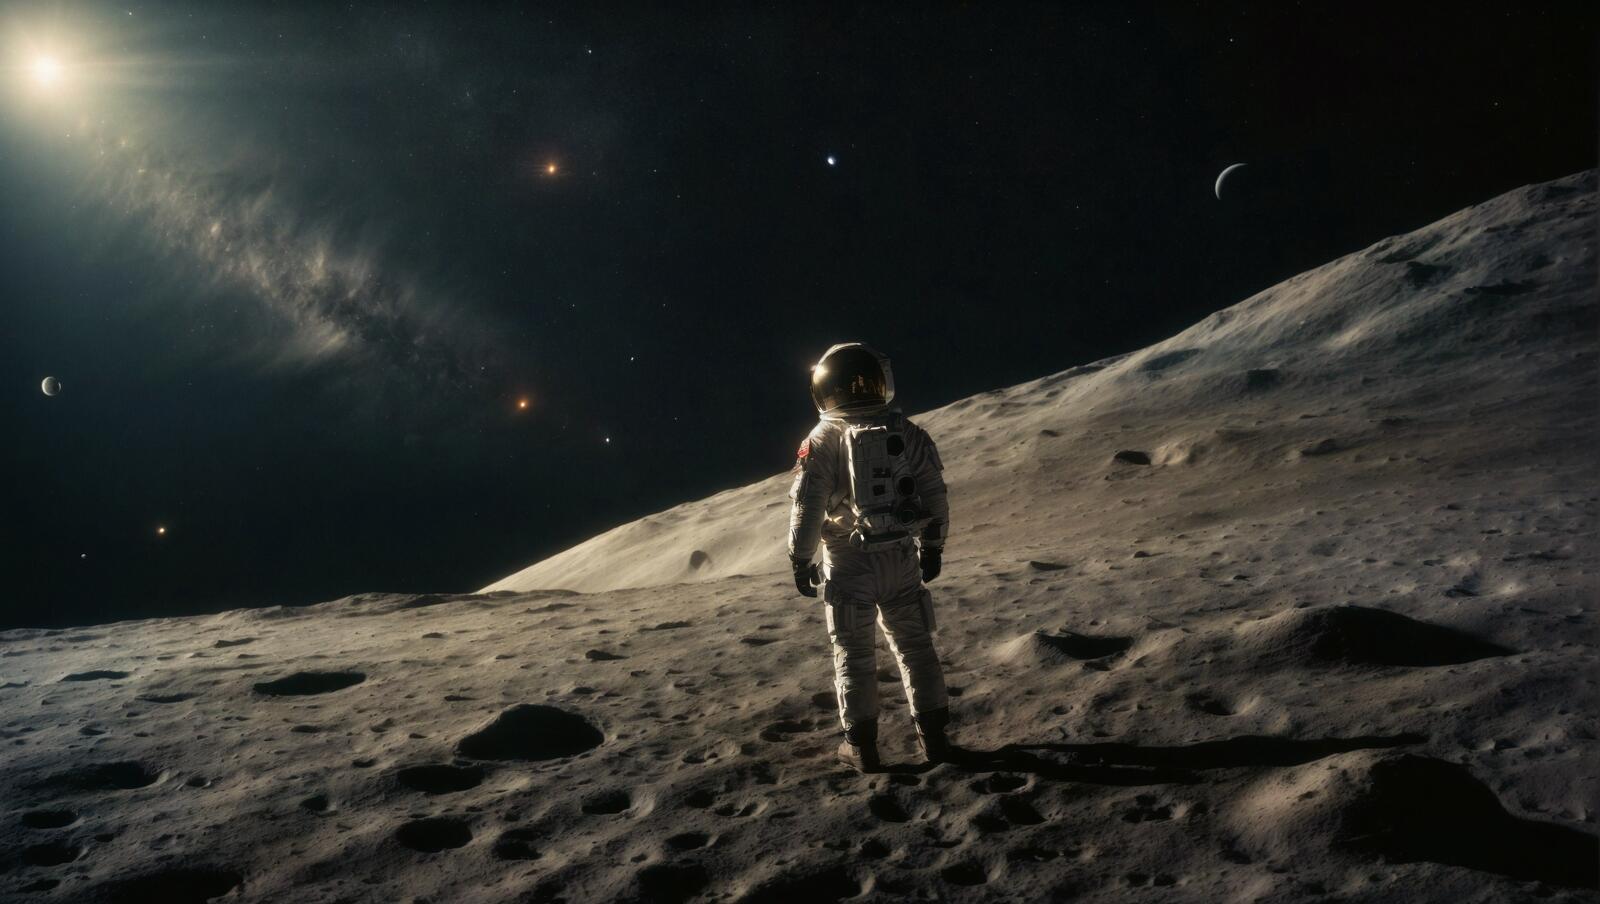 Free photo A man stands on the moon and looks up at a distant line of stars.